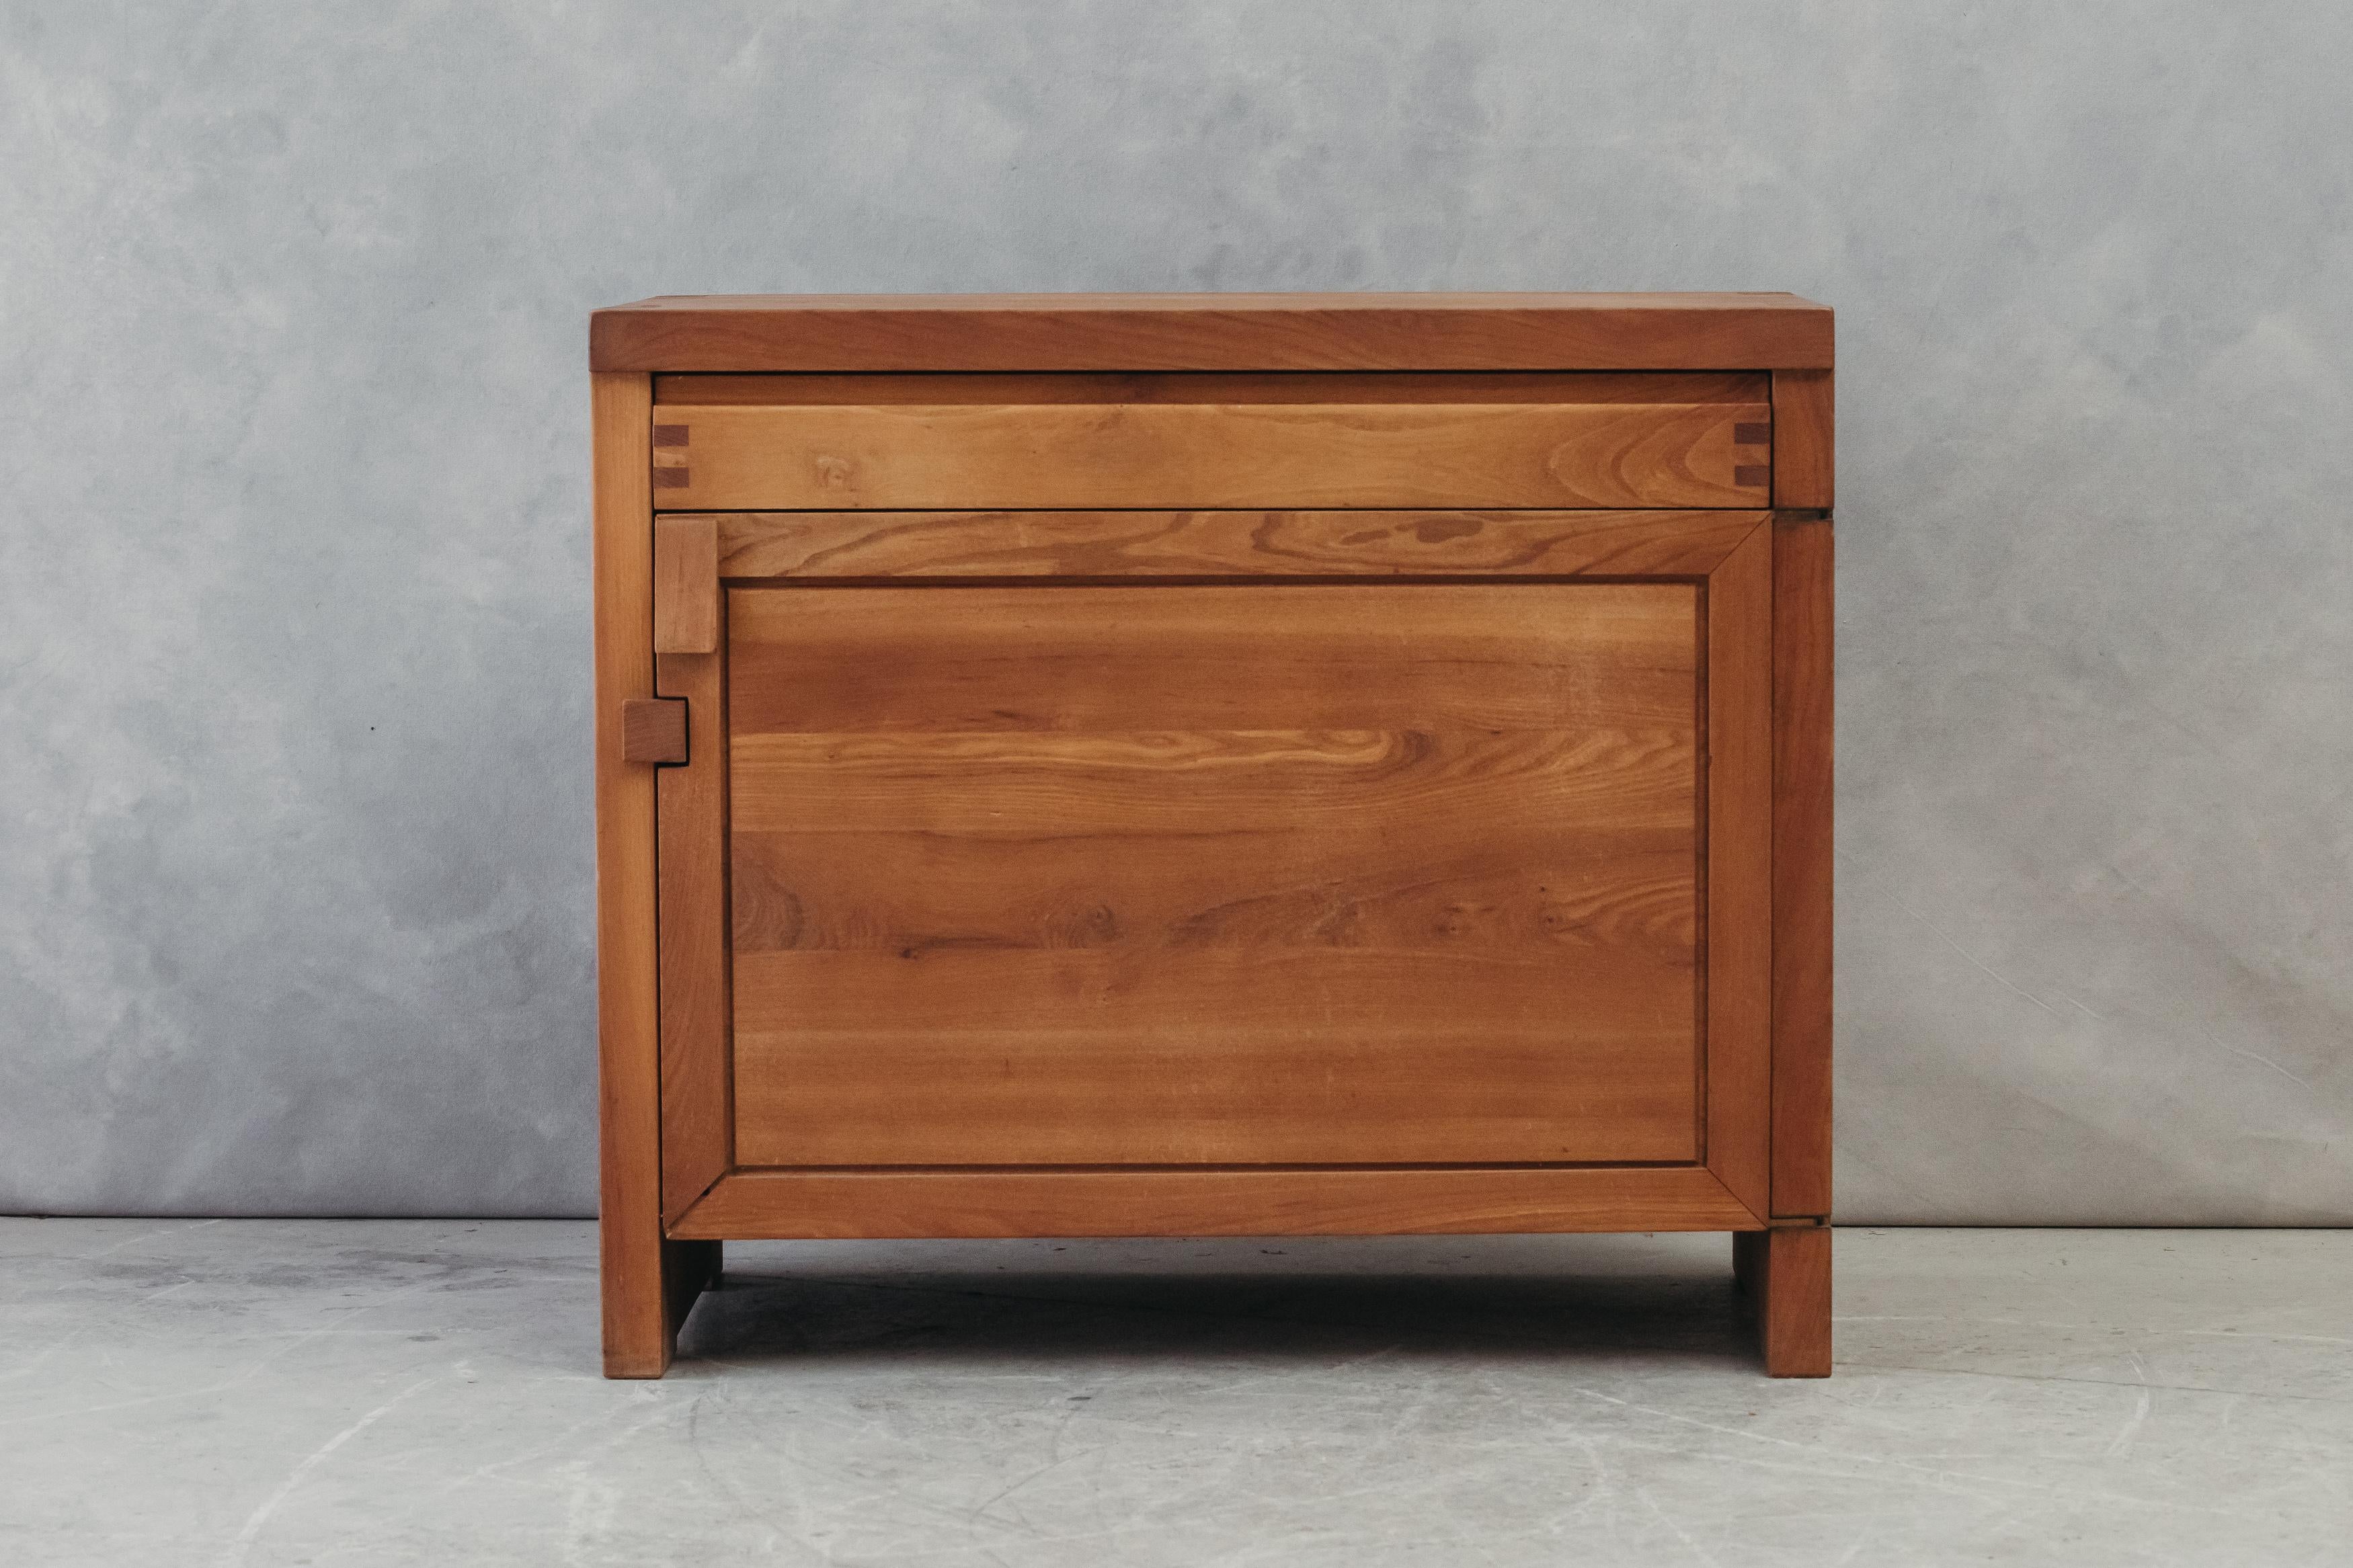 Vintage Pierre Chapo cabinet, Model R09, from France, circa 1965. Solid elm construction with very light wear and use.

We don't have the time to write an extensive description on each of our pieces. We prefer to speak directly with our clients. So,